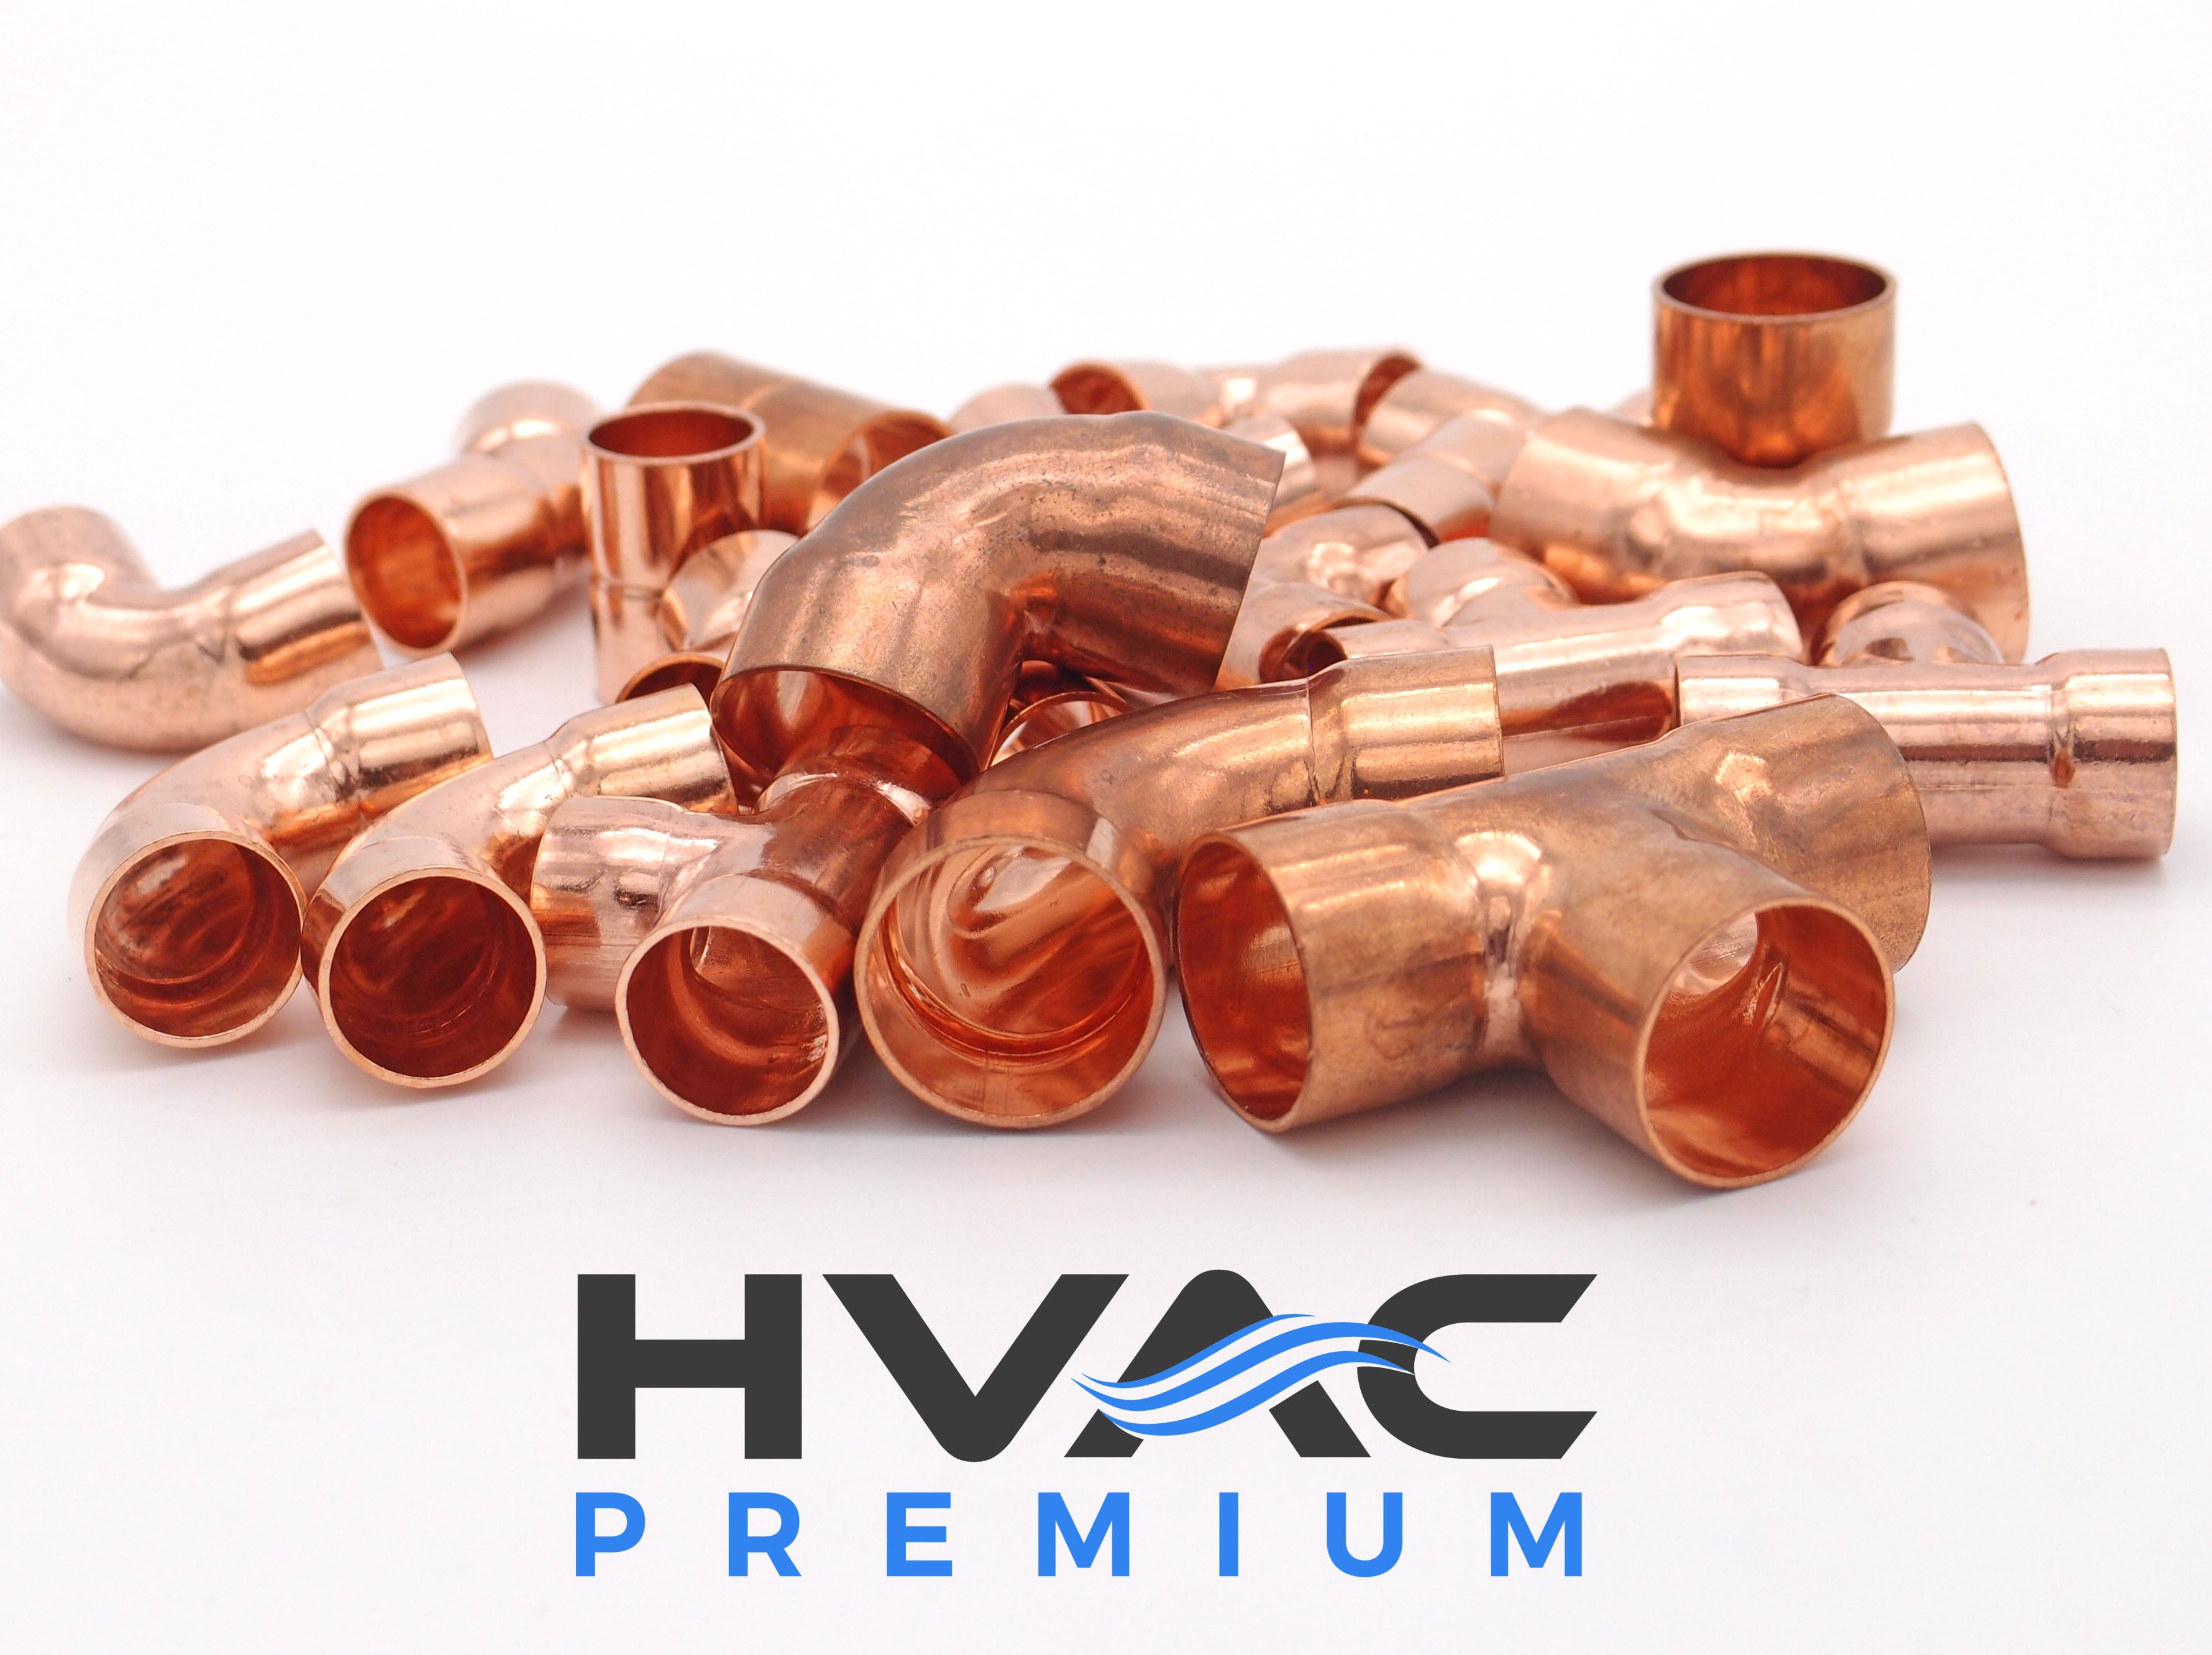 Copper Fitting 1 Inch (HVAC Outer Dimension) 7/8 Inch (Plumbing Inner Dimension) - Copper Tee & HVAC – 99.9% Pure Copper - 5 Pack